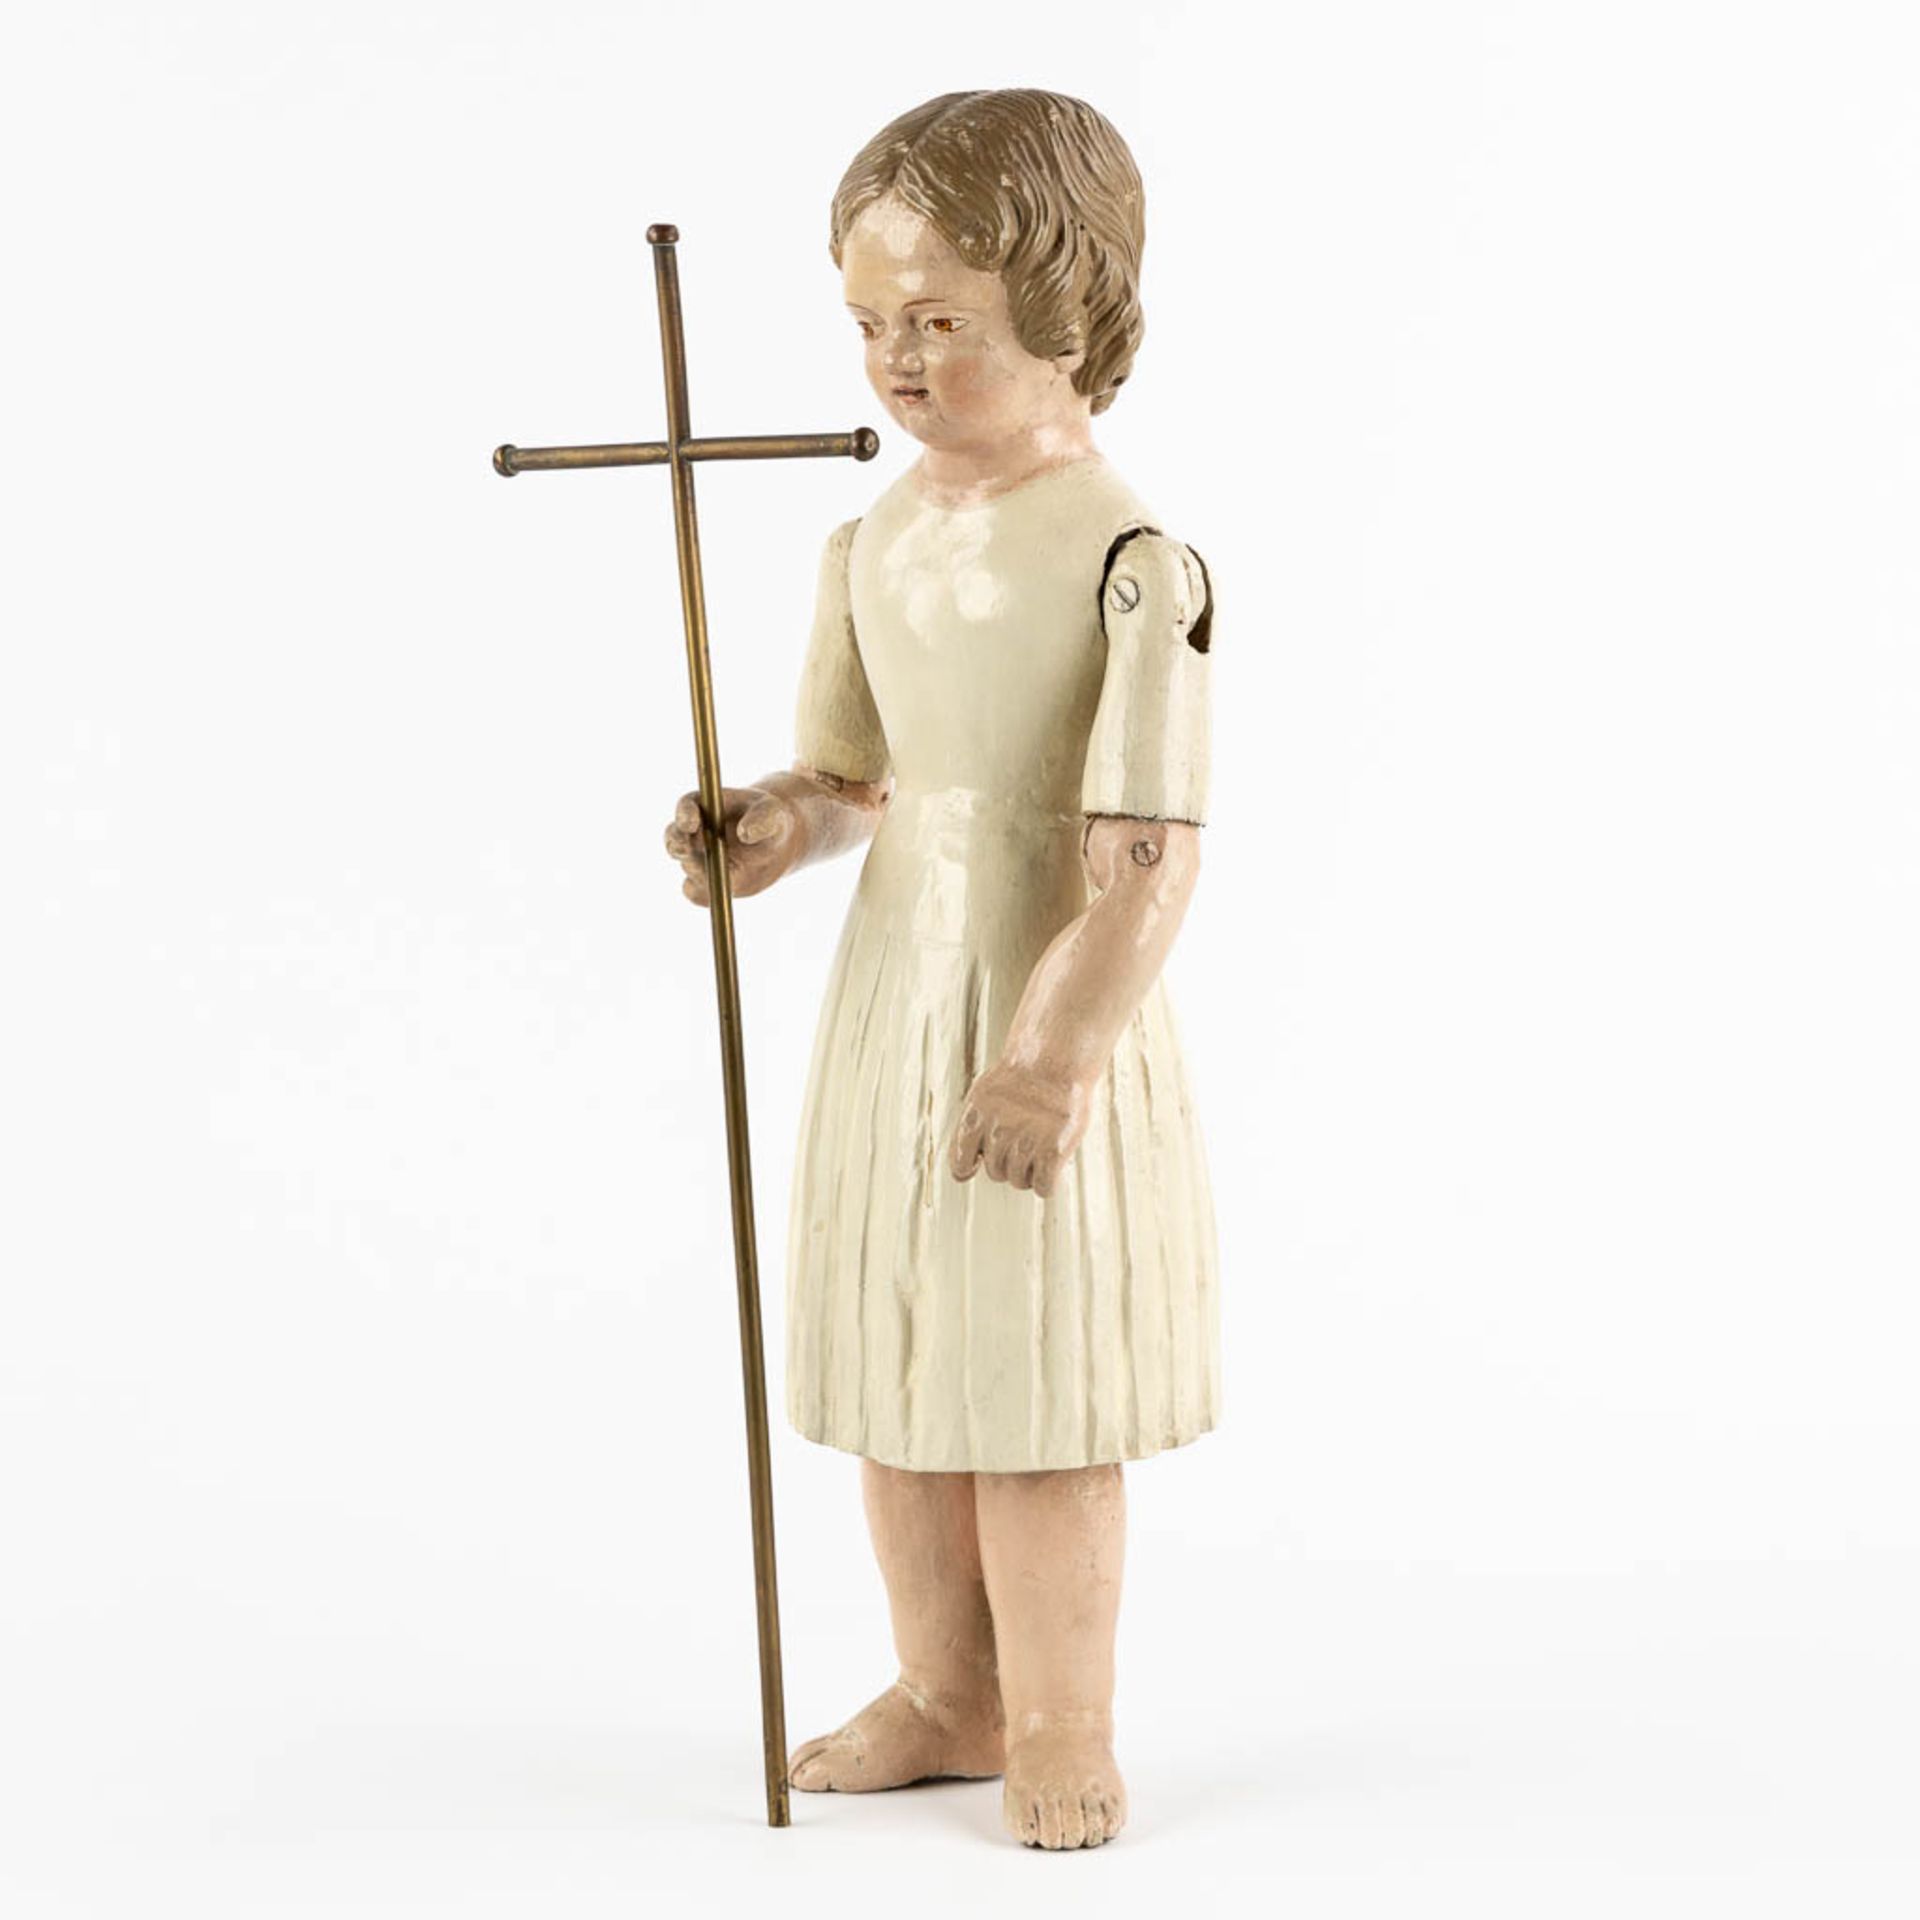 An antique patinated and wood-sculptured doll. 19th C. (L:11,5 x W:17 x H:45 cm) - Image 4 of 12